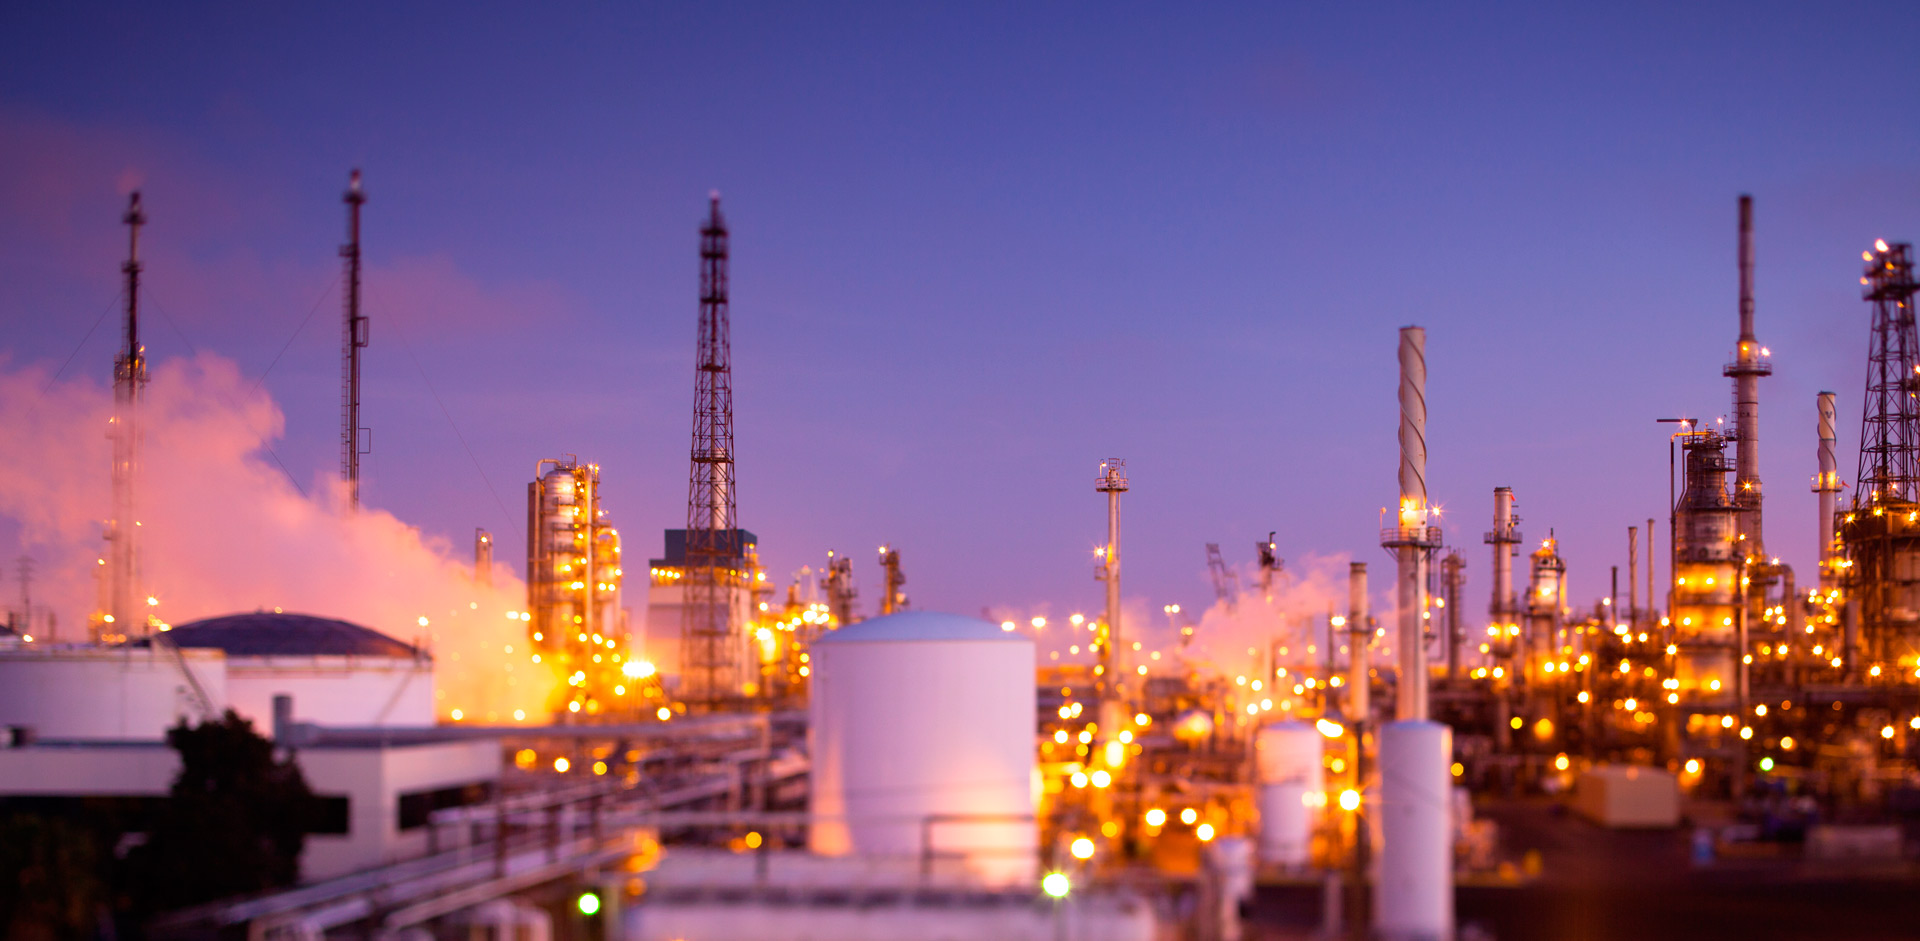 Excellent Cost-effective Lighting Performance for Oil Refinery Plant